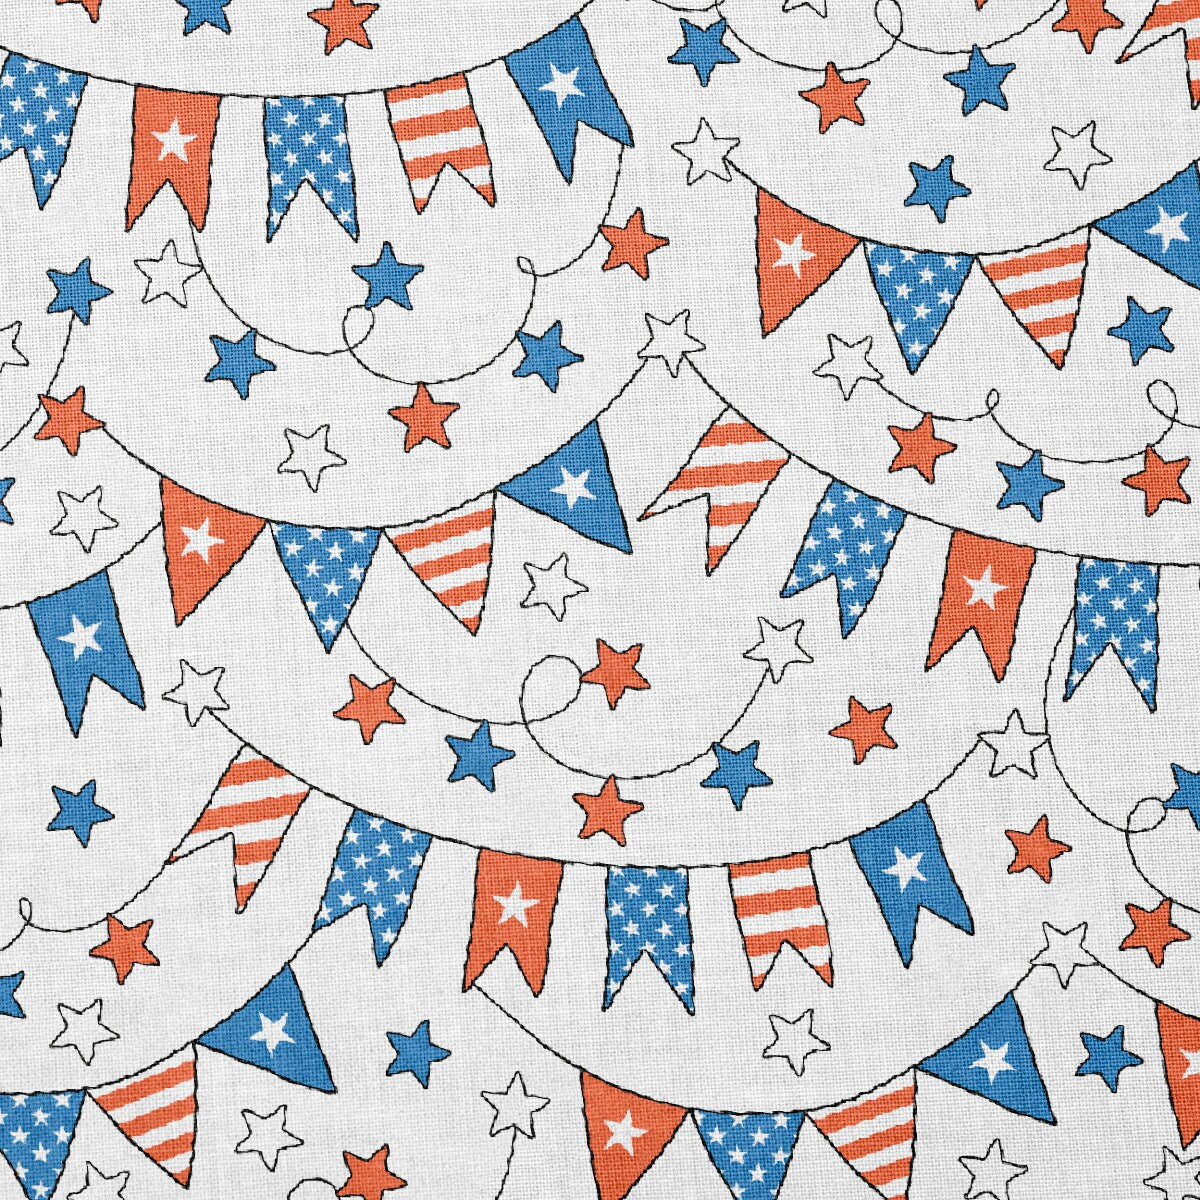 100% Cotton Fabric By the Yard Printed in USA Cotton Sateen -  Cotton  CTN2189 4th of July Patriotic